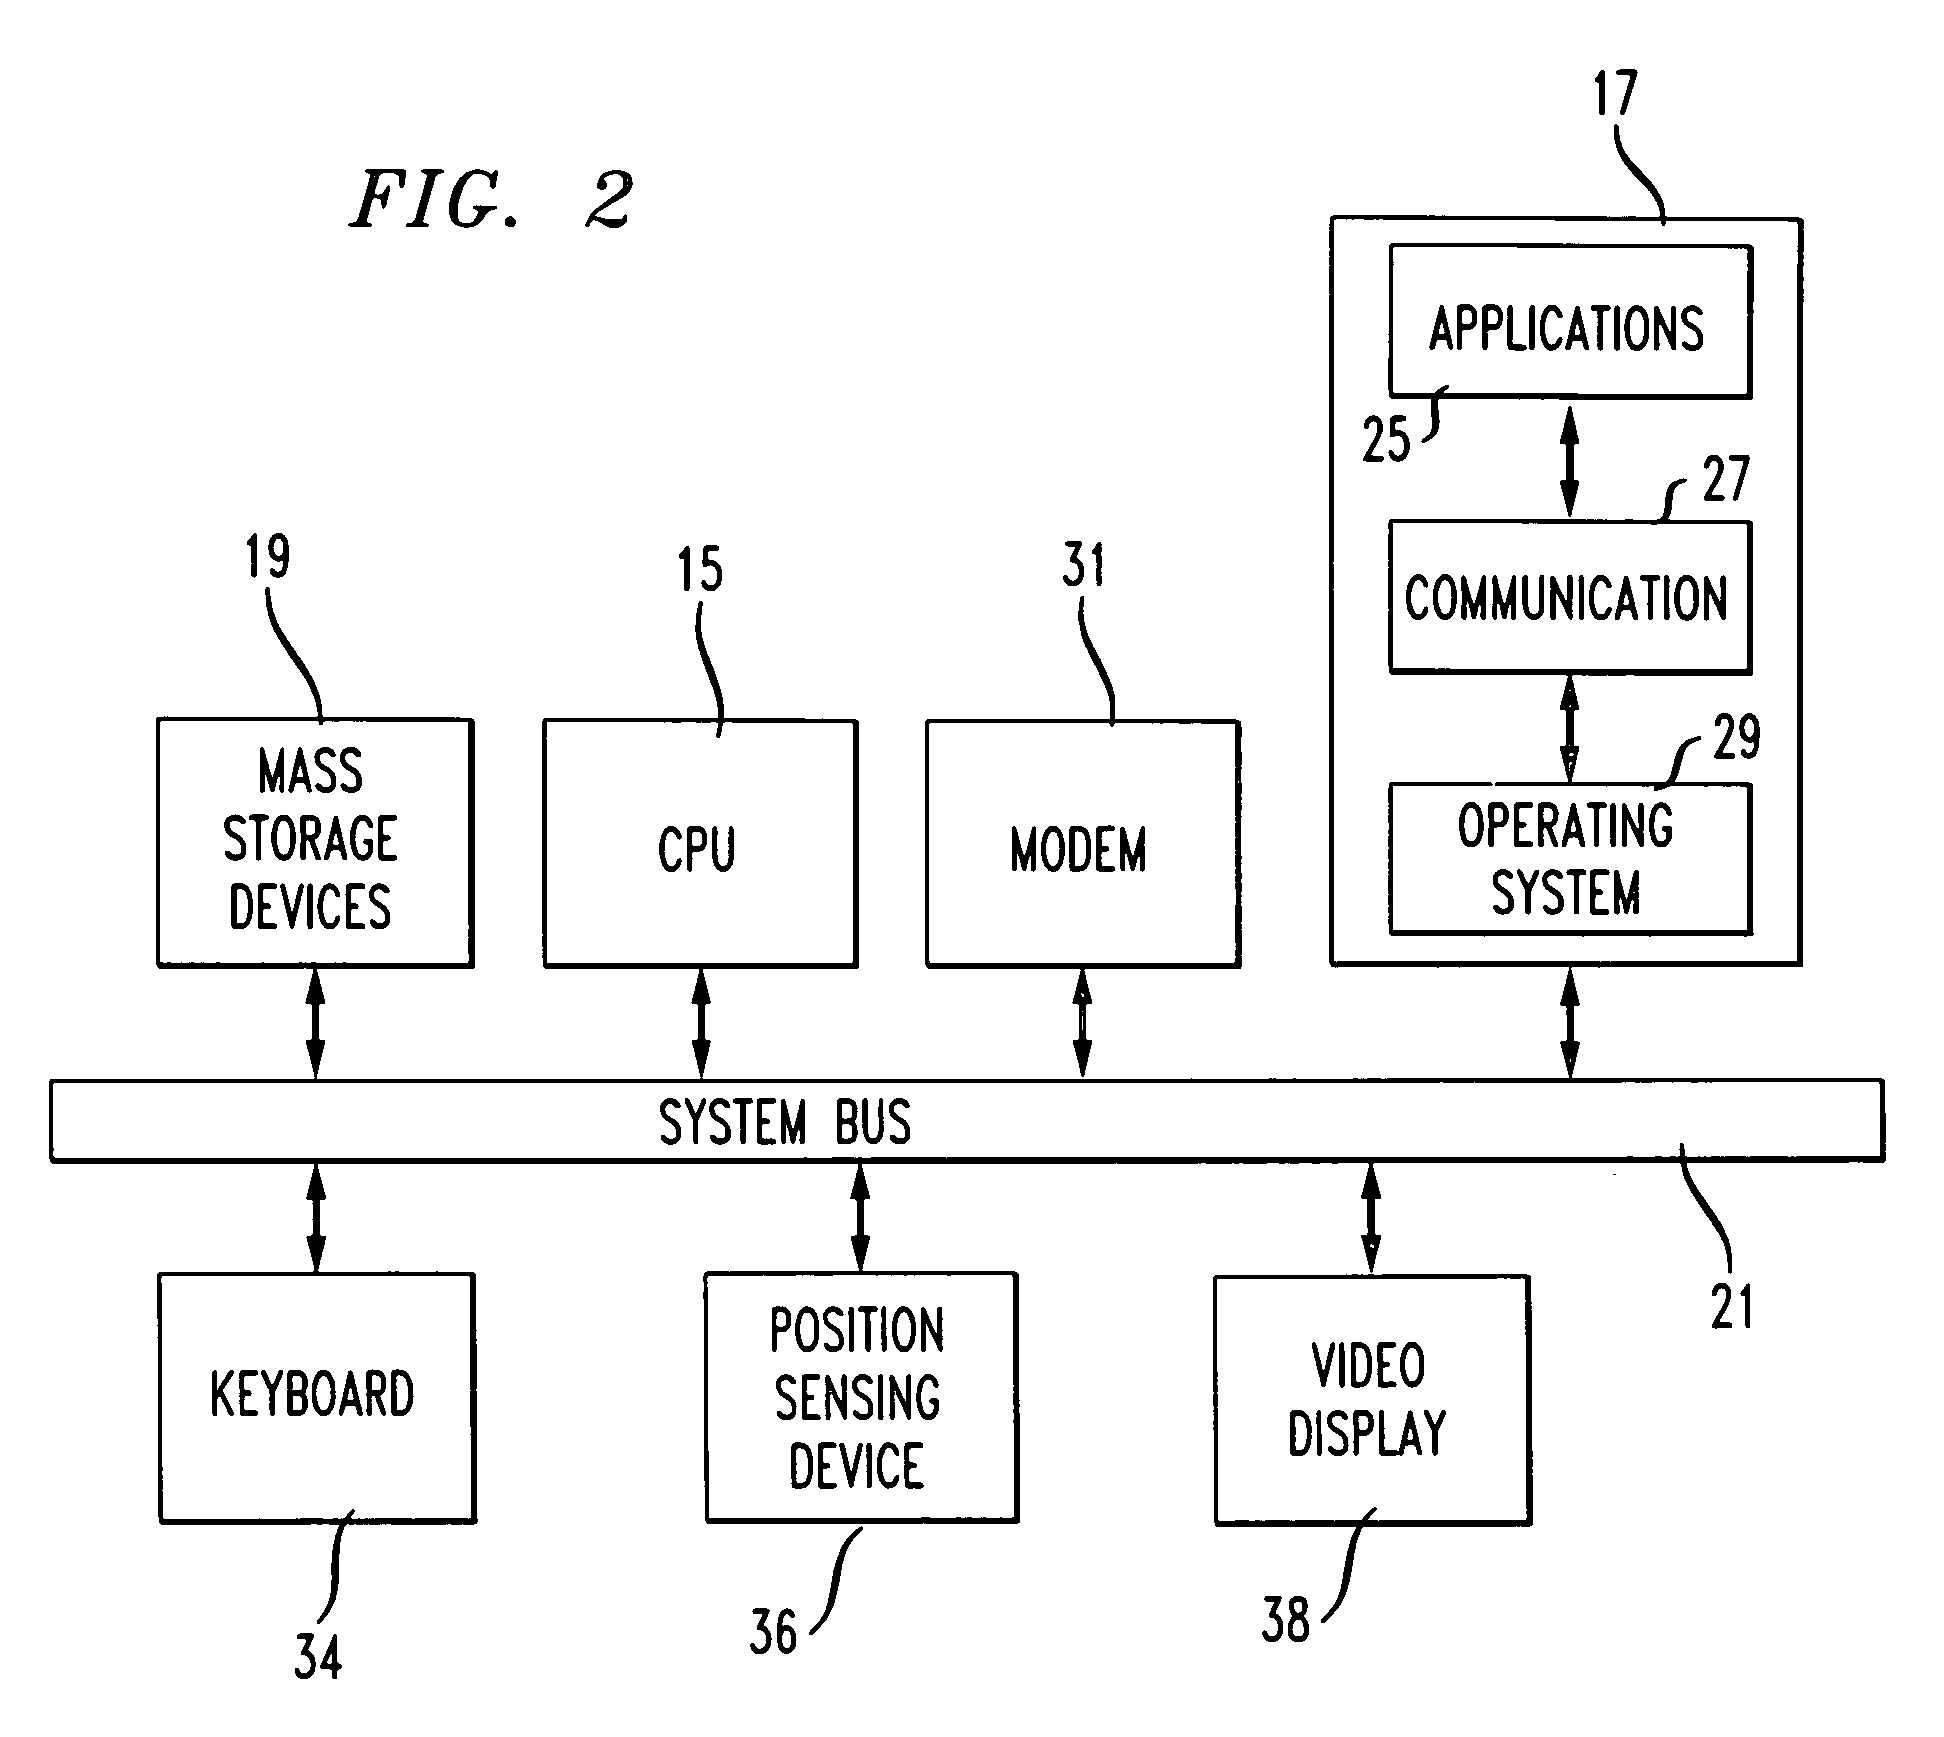 Method and system for providing reliability and availability in a distributed component object model (DCOM) object oriented system